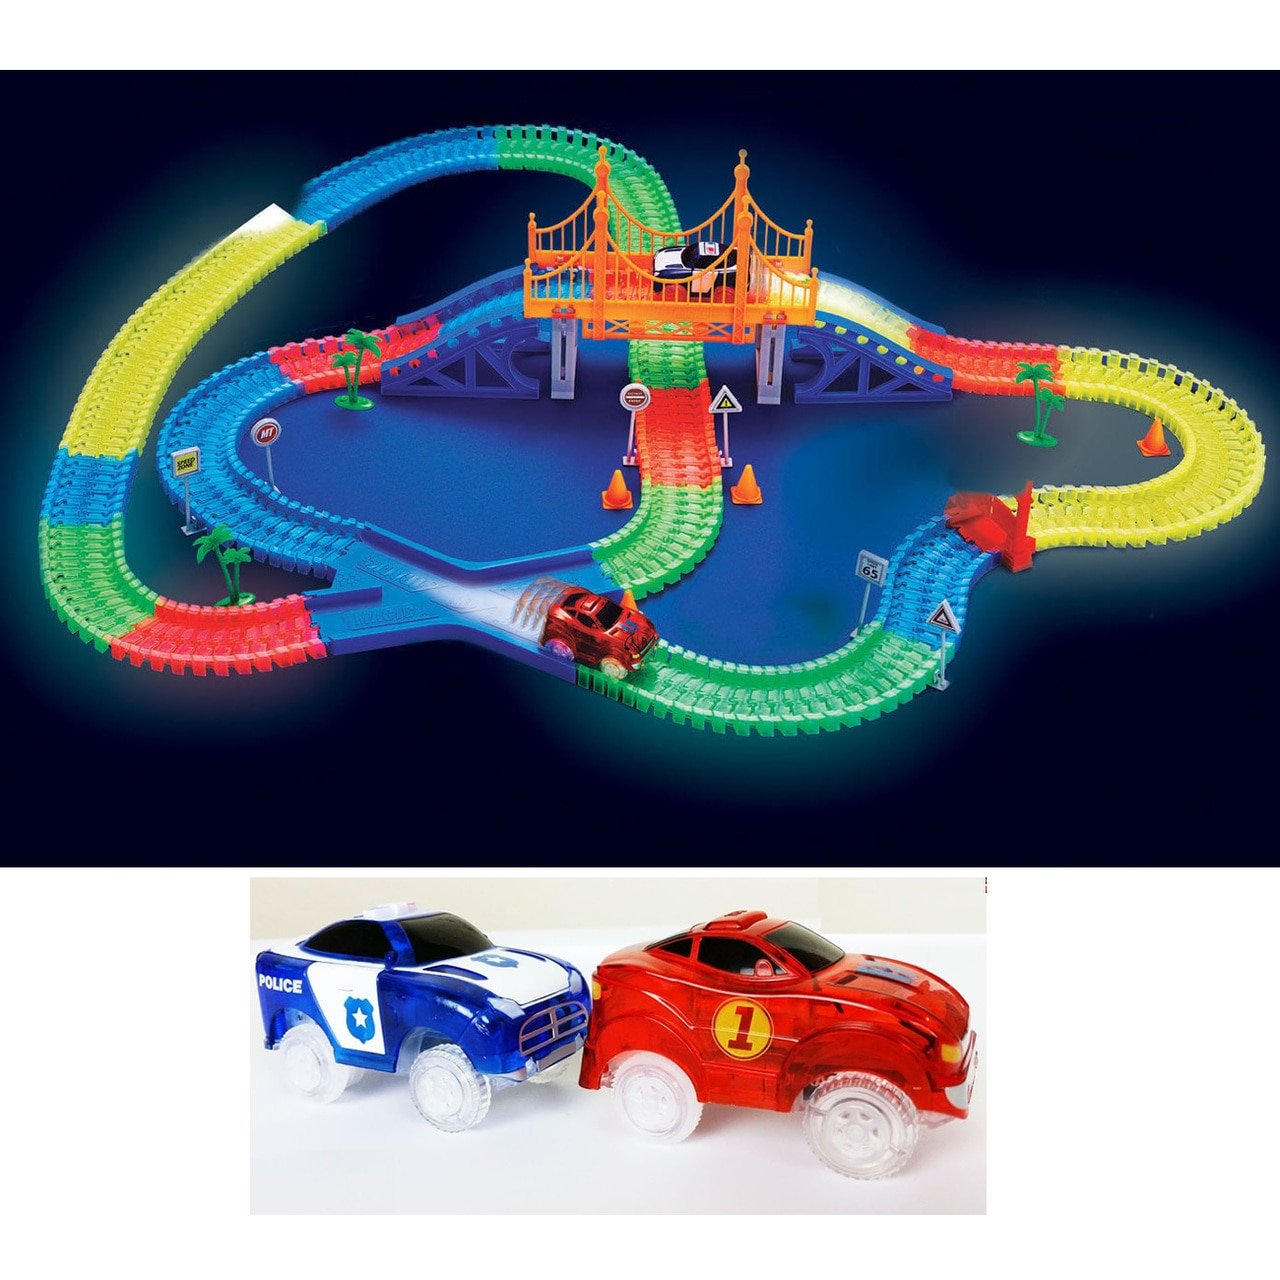 Ontel Magic Tracks Mega Set - 2 LED Race Cars and 18 ft. of Flexible,  Bendable Glow in the Dark Racetrack - As Seen on TV